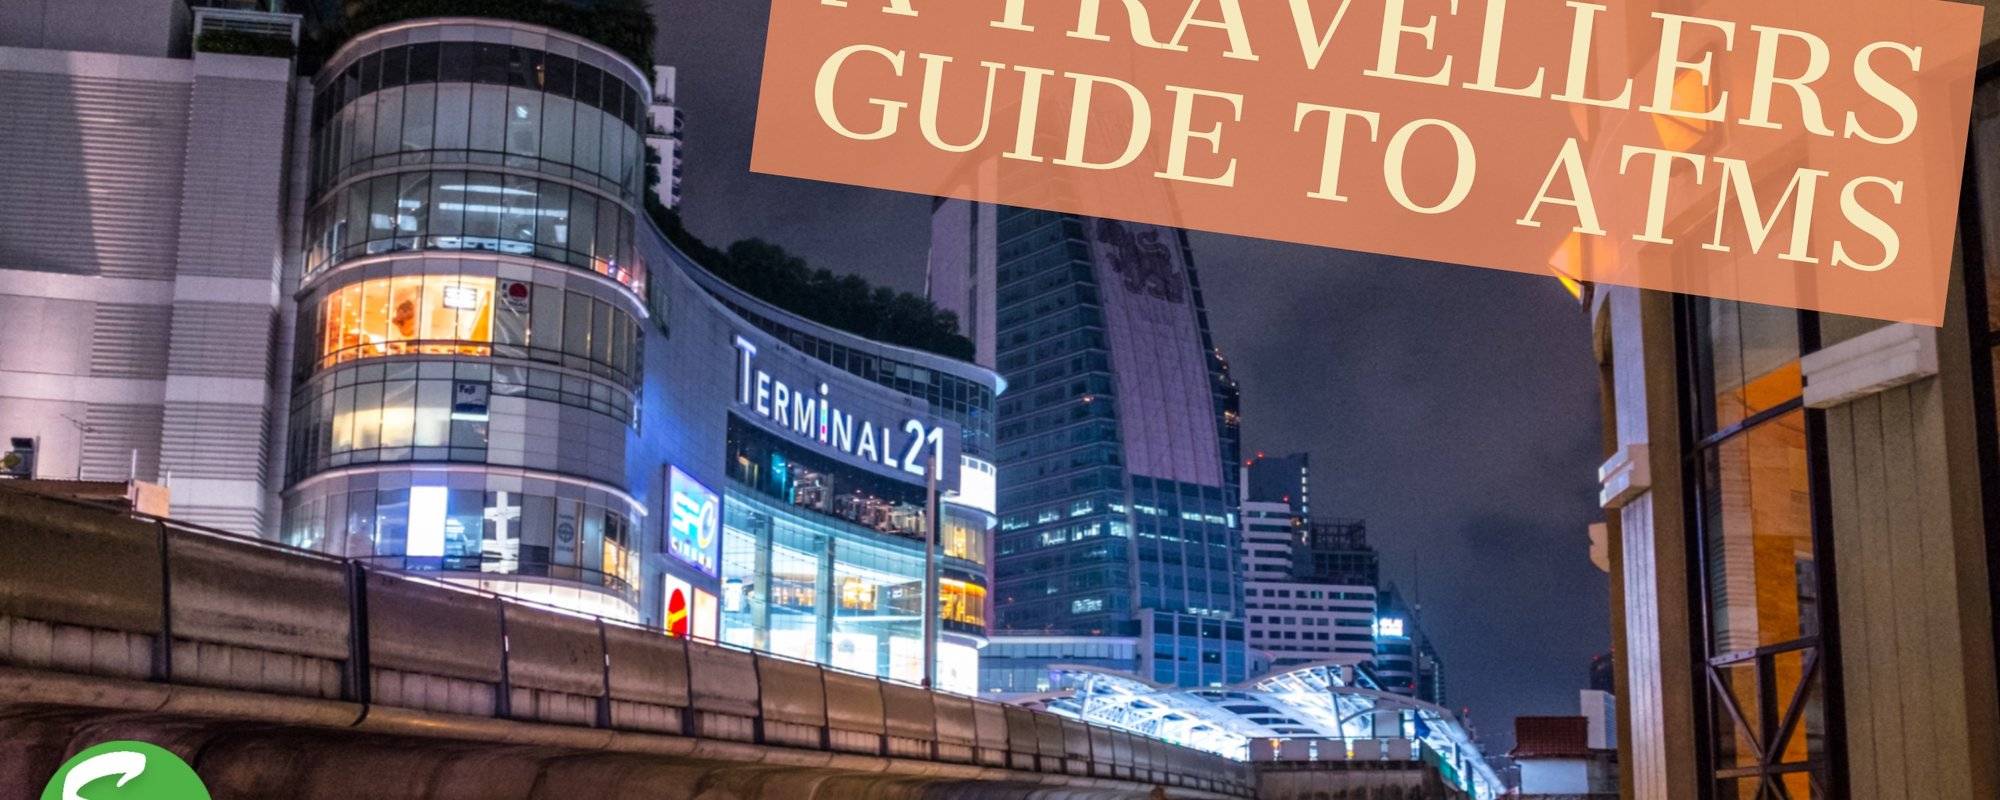 A Travellers Guide To ATMs - The Best ATMs To Use While Abroad. (19 March 2018)